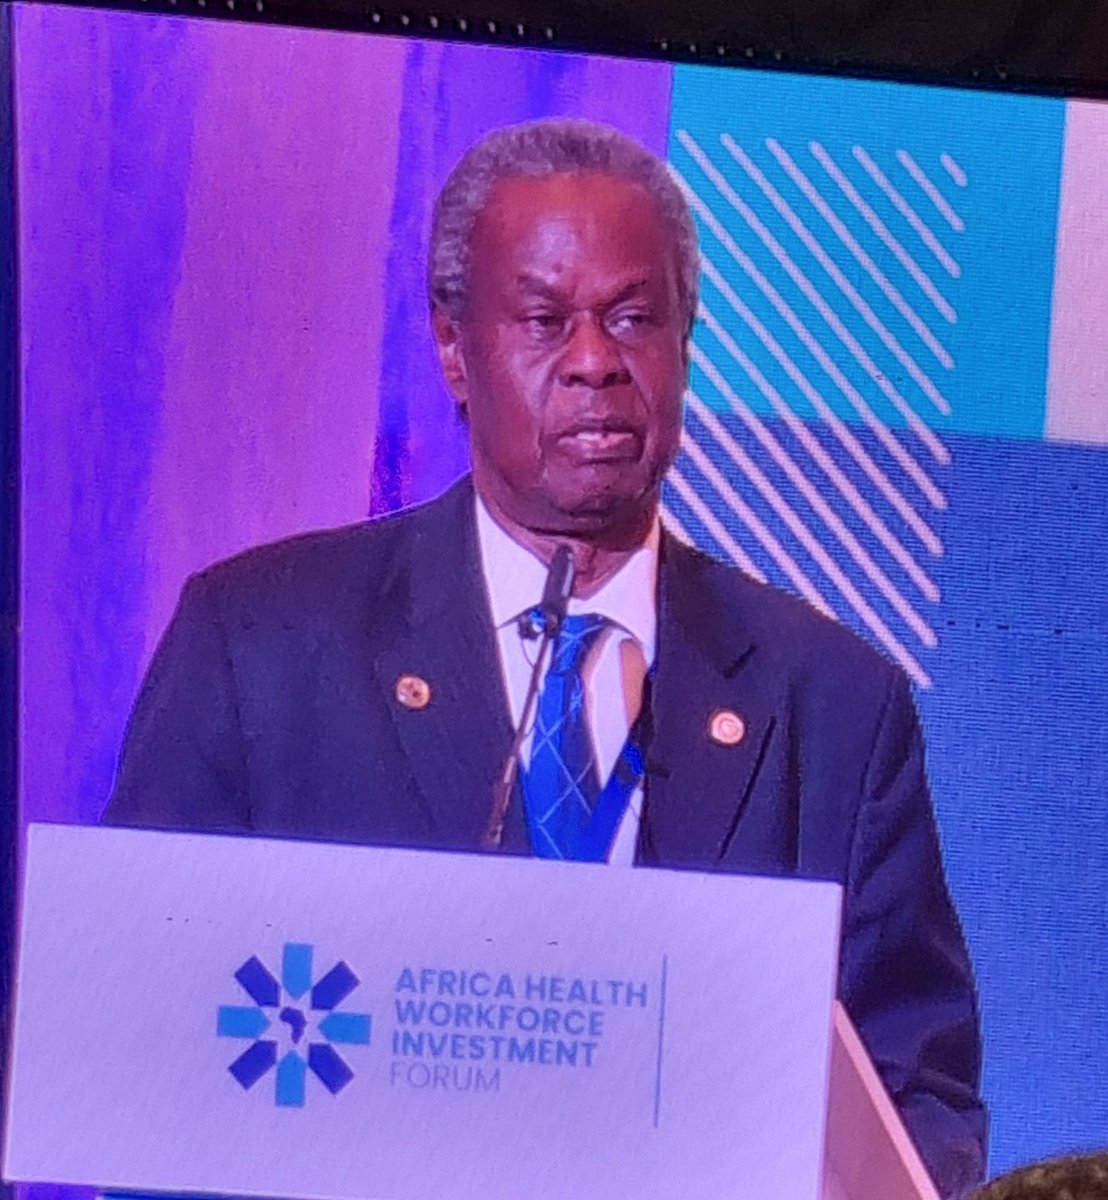 Prof. Omaswa Francis of the African Centre for Global Health and Social Transformation, speaking at the Africa Health Workforce Investment Forum. He has been an expert advisor to the forum. He has urged all of us to make this a buzz so that everyone can hear about it.